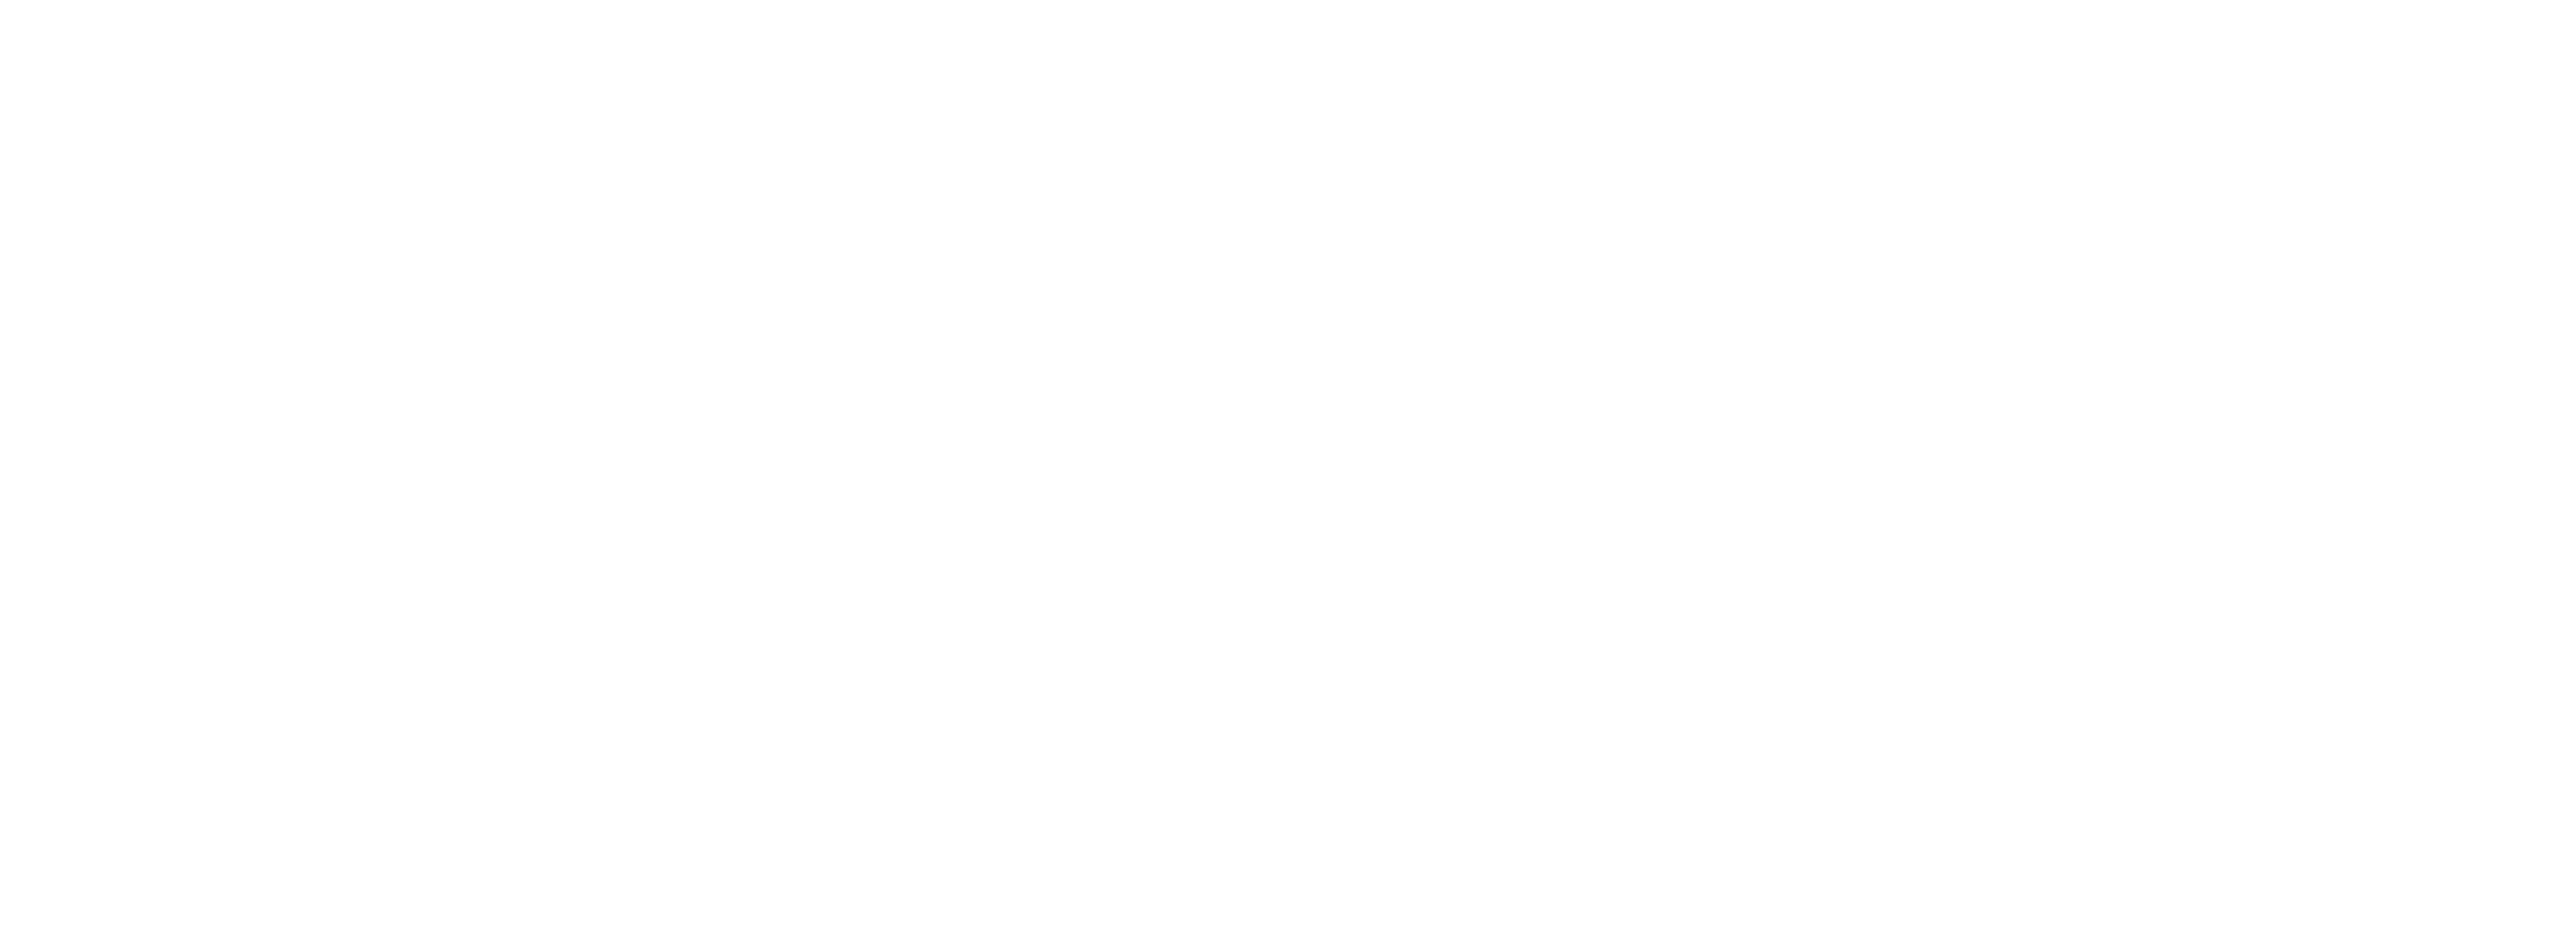 Logo of grandview adventist academy featuring a shield with an open book, a tree, and wheat, all in white on a green background. OCIDM,io Branding and Digital marketing Hamilton, Toronto, Oakville, Mississauga